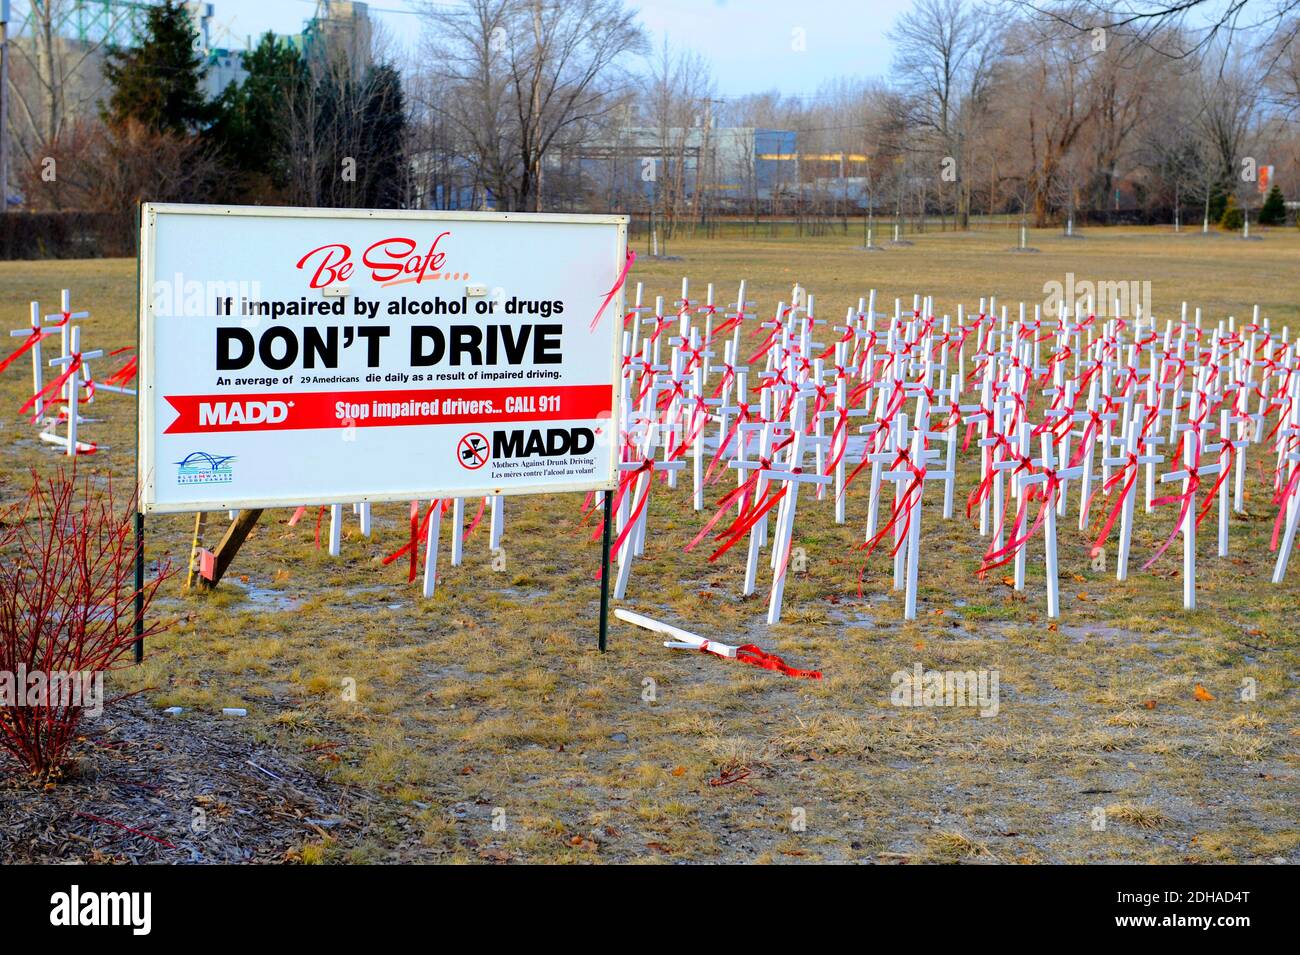 white crosses in ground signify lives lost due to drunk drivers causing accidents Stock Photo